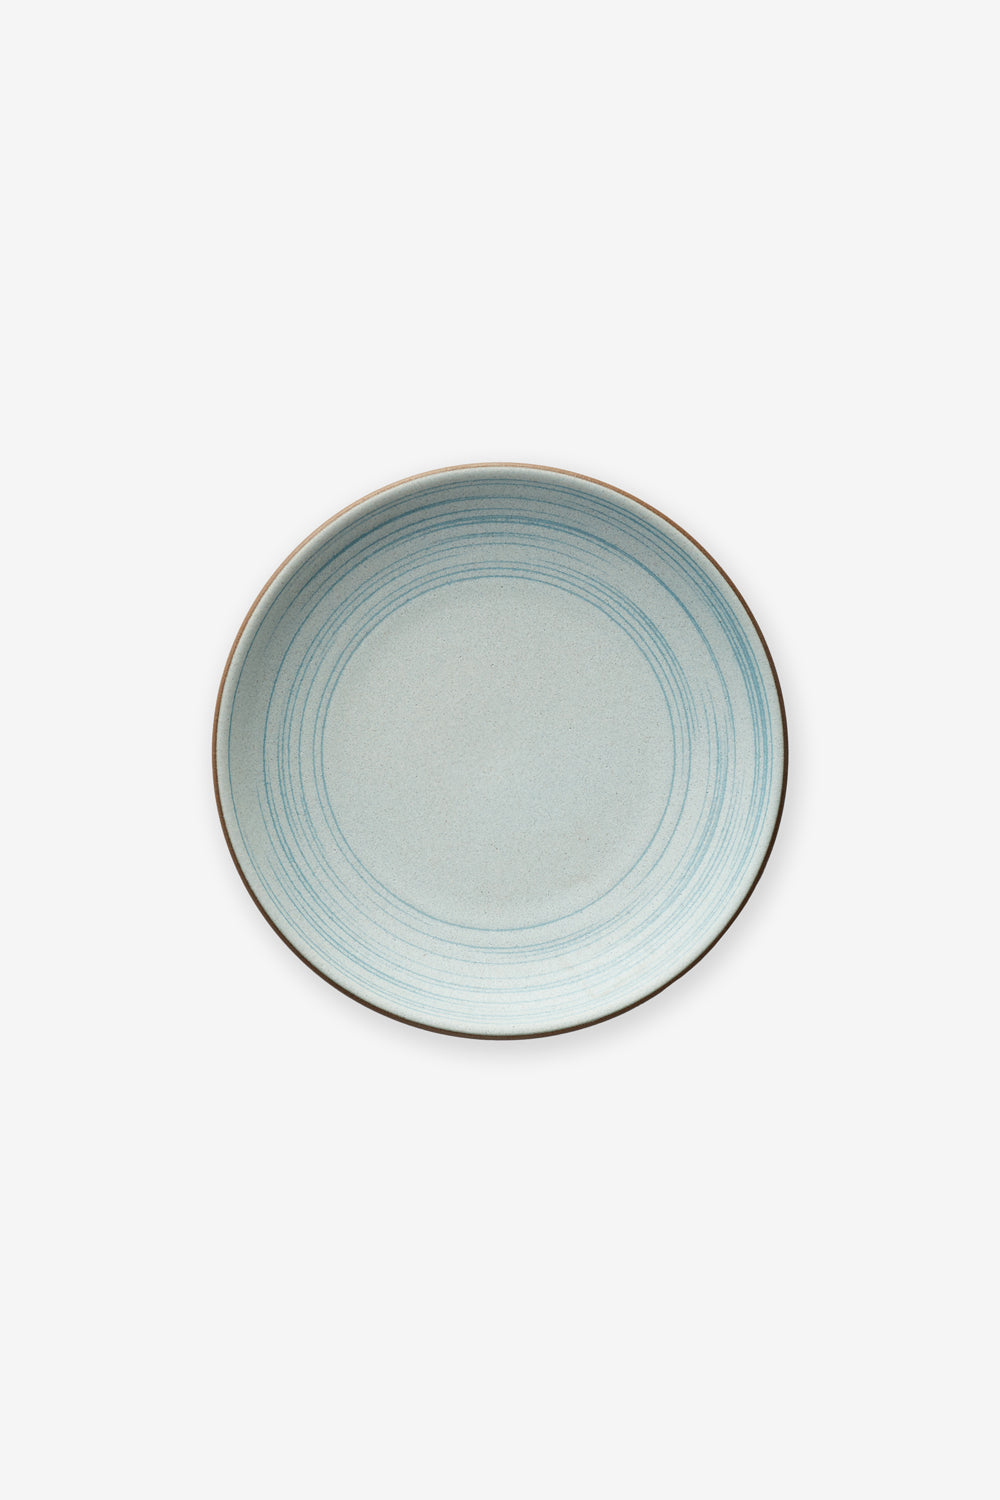 Heath Ceramics Etched Salad Place in Limited Edition Wave Blue Color.